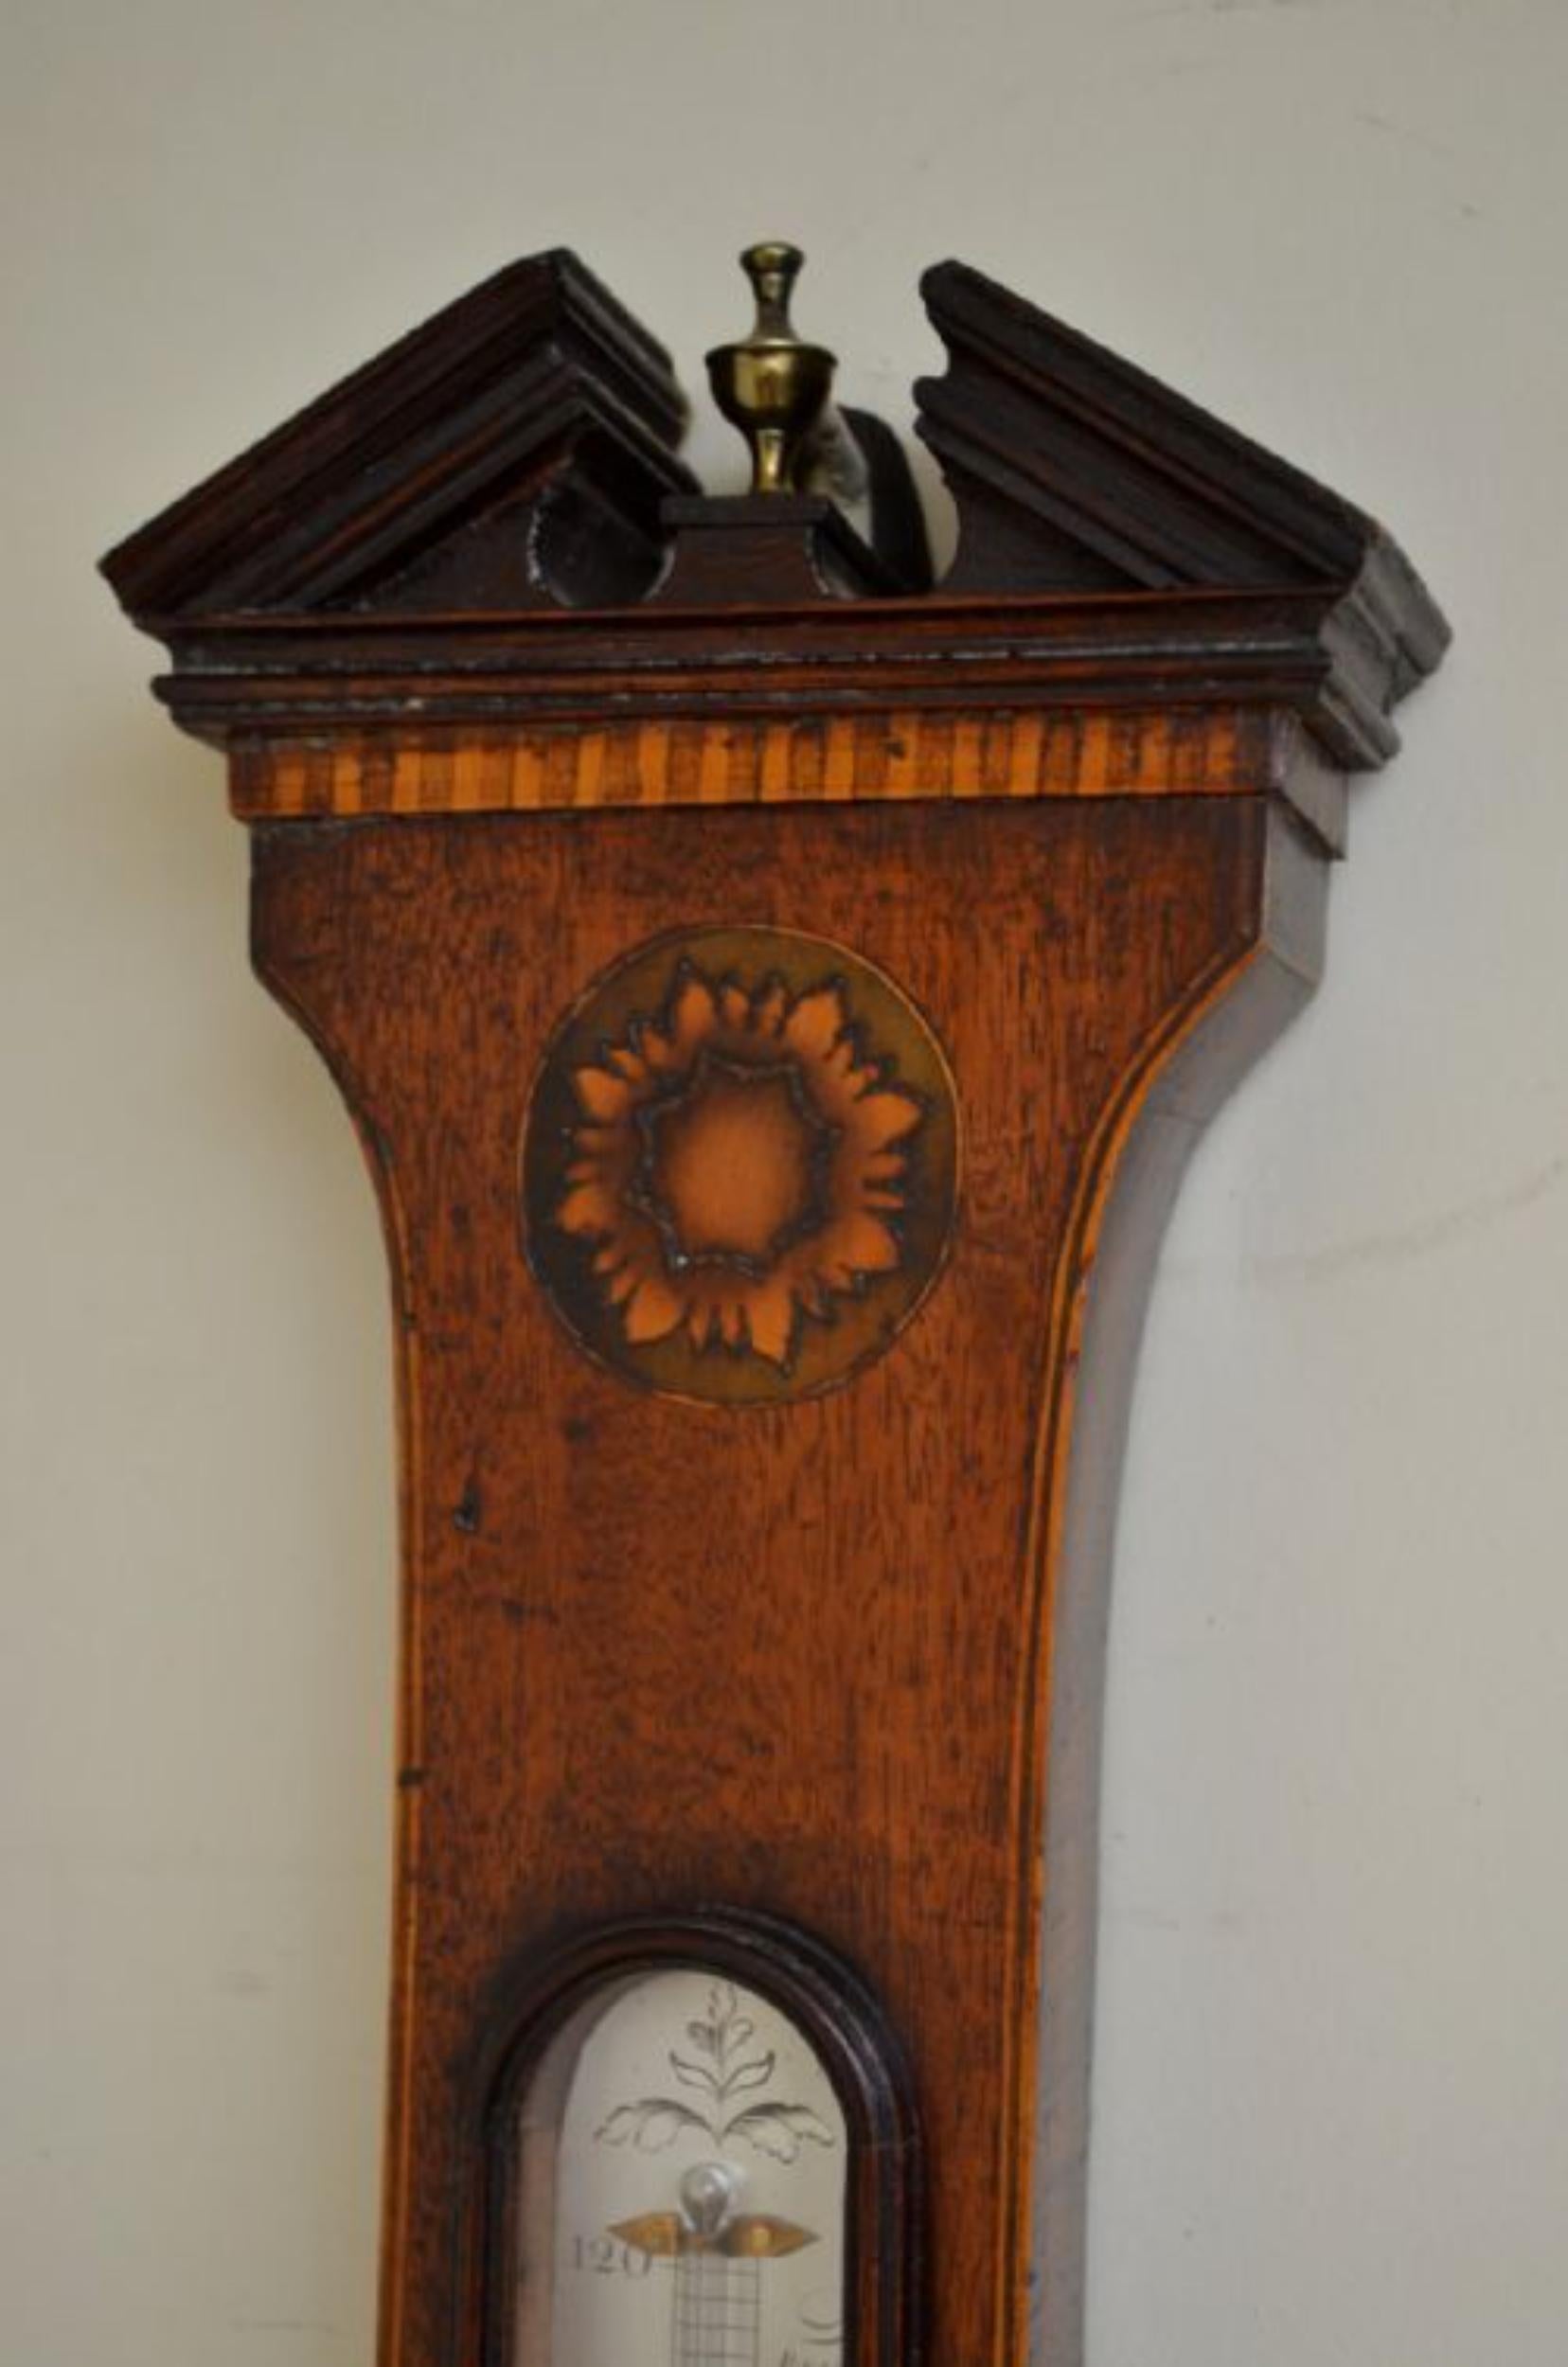 A fine quality, Regency mahogany wheel barometer, the mahogany veneered case with architectural pediment above dentil banding, cross banded edge with triple edge line stringing, inlaid floral paterea and oak and acorn ovals, the 8” dial well